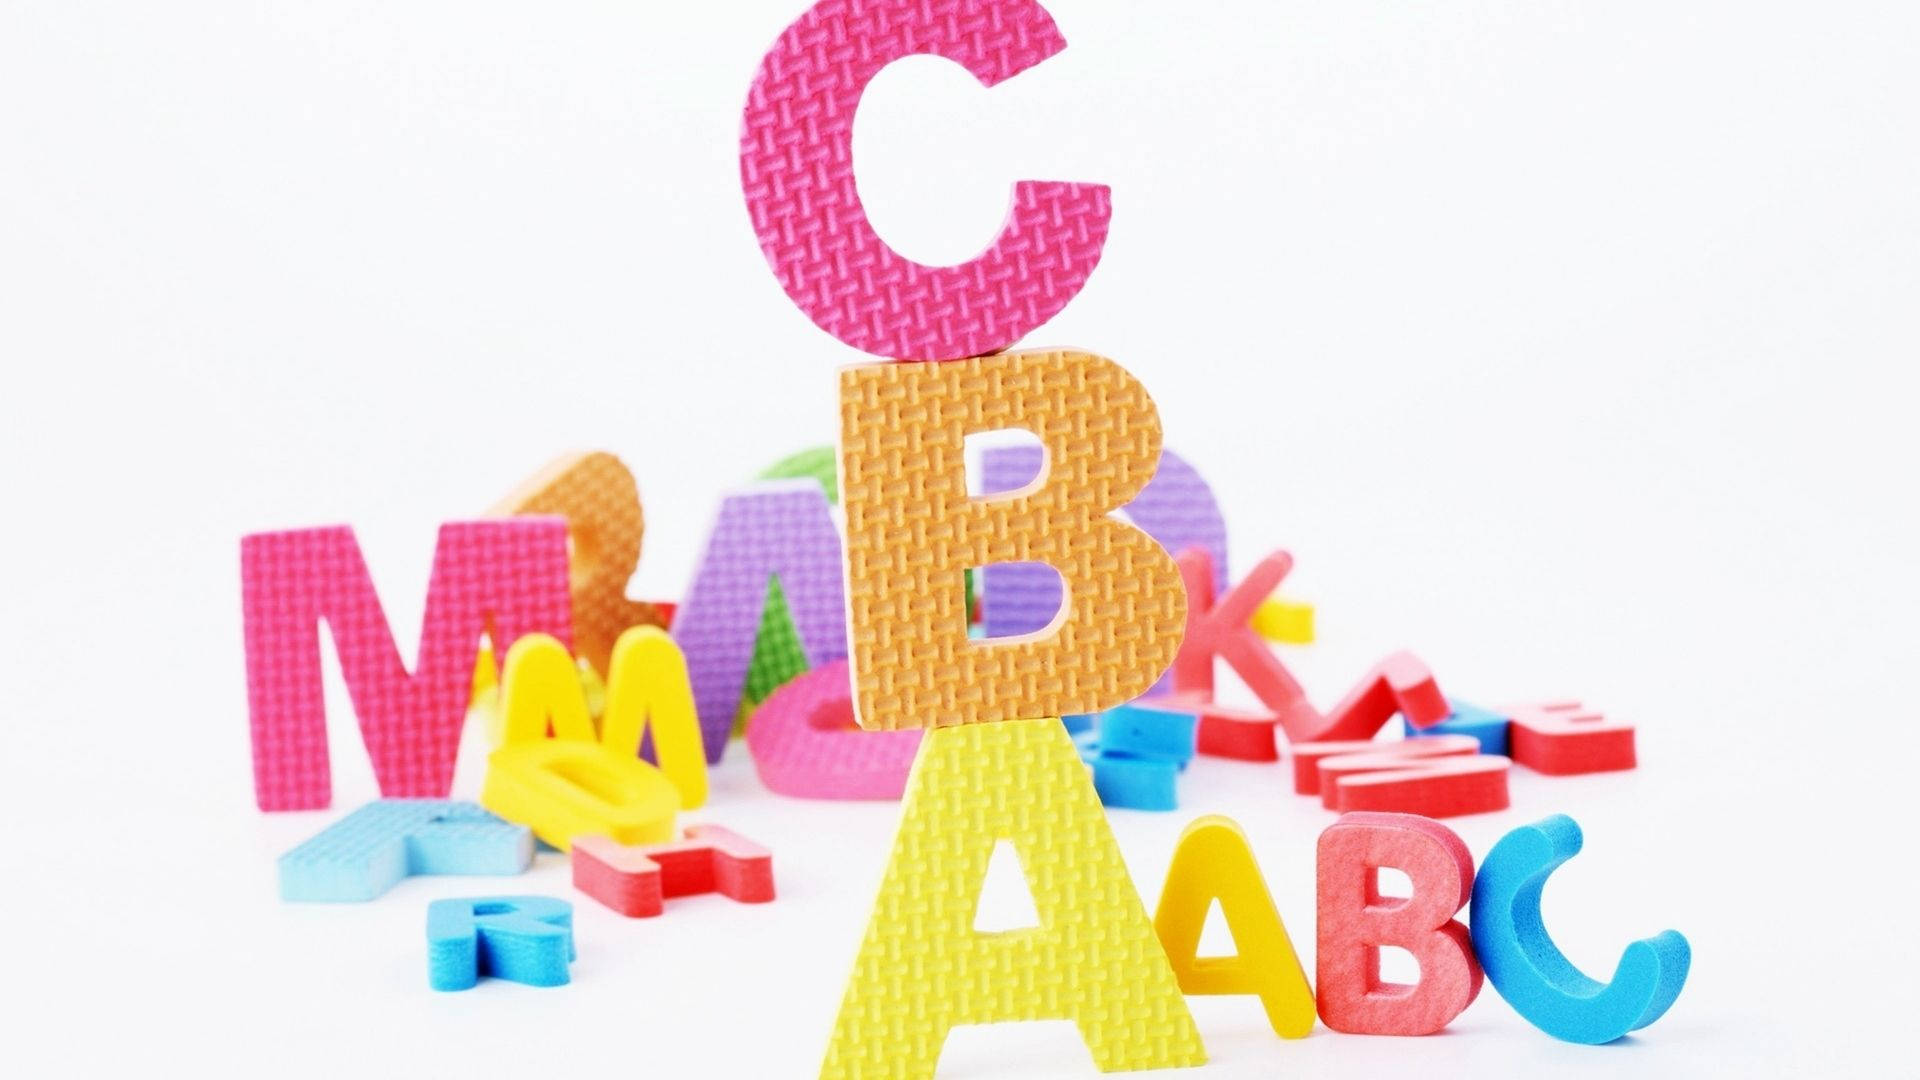 Stacked Rubber Alphabets Wallpaper